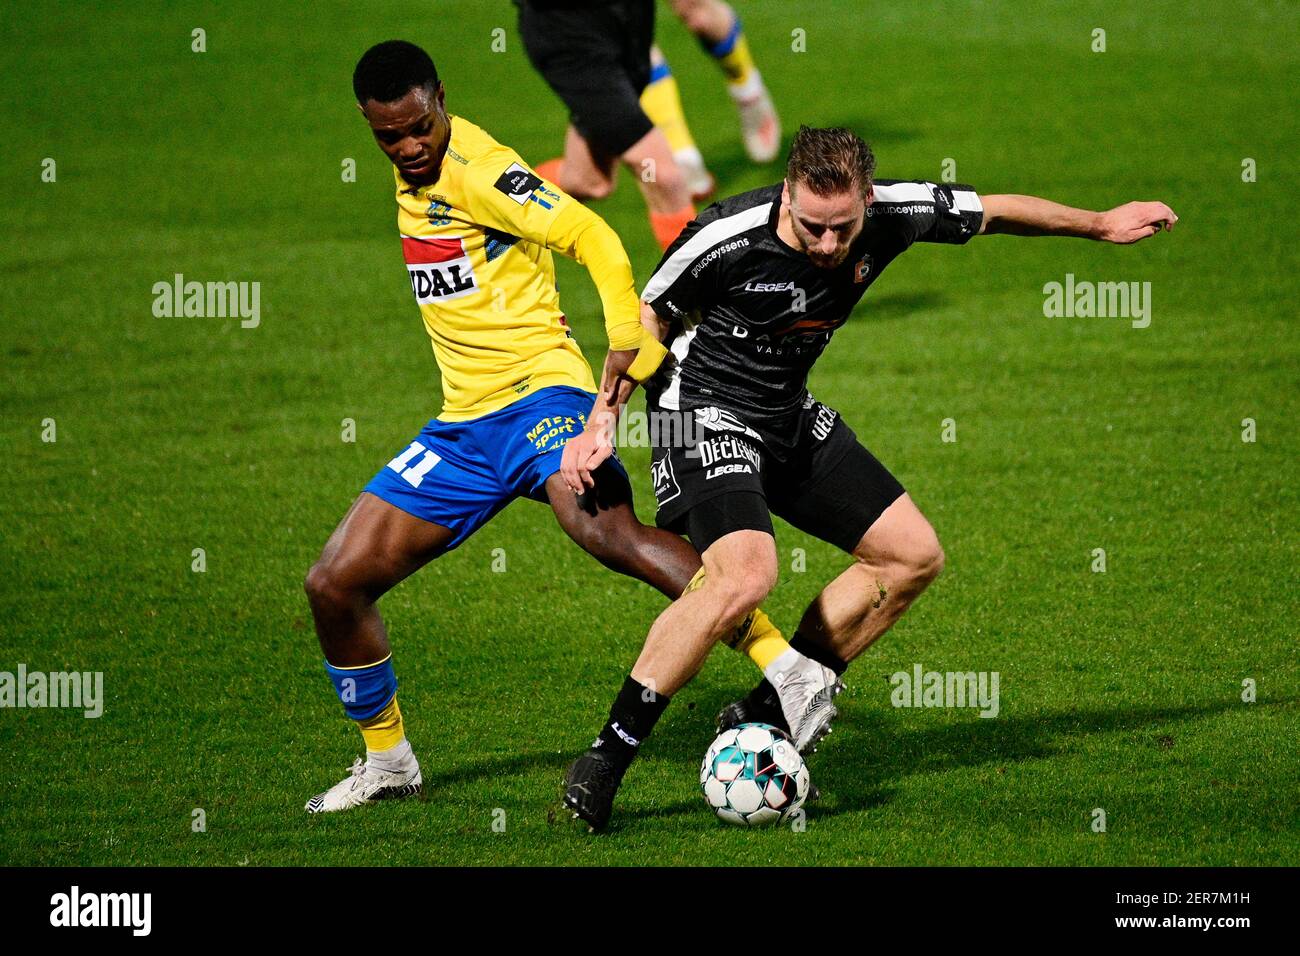 Westerlo's Ange-Freddy Pluman and Deinze's Alessio Staelens fight for the ball during a soccer match between KVC Westerlo and KMSK Deinze, Sunday 28 F Stock Photo